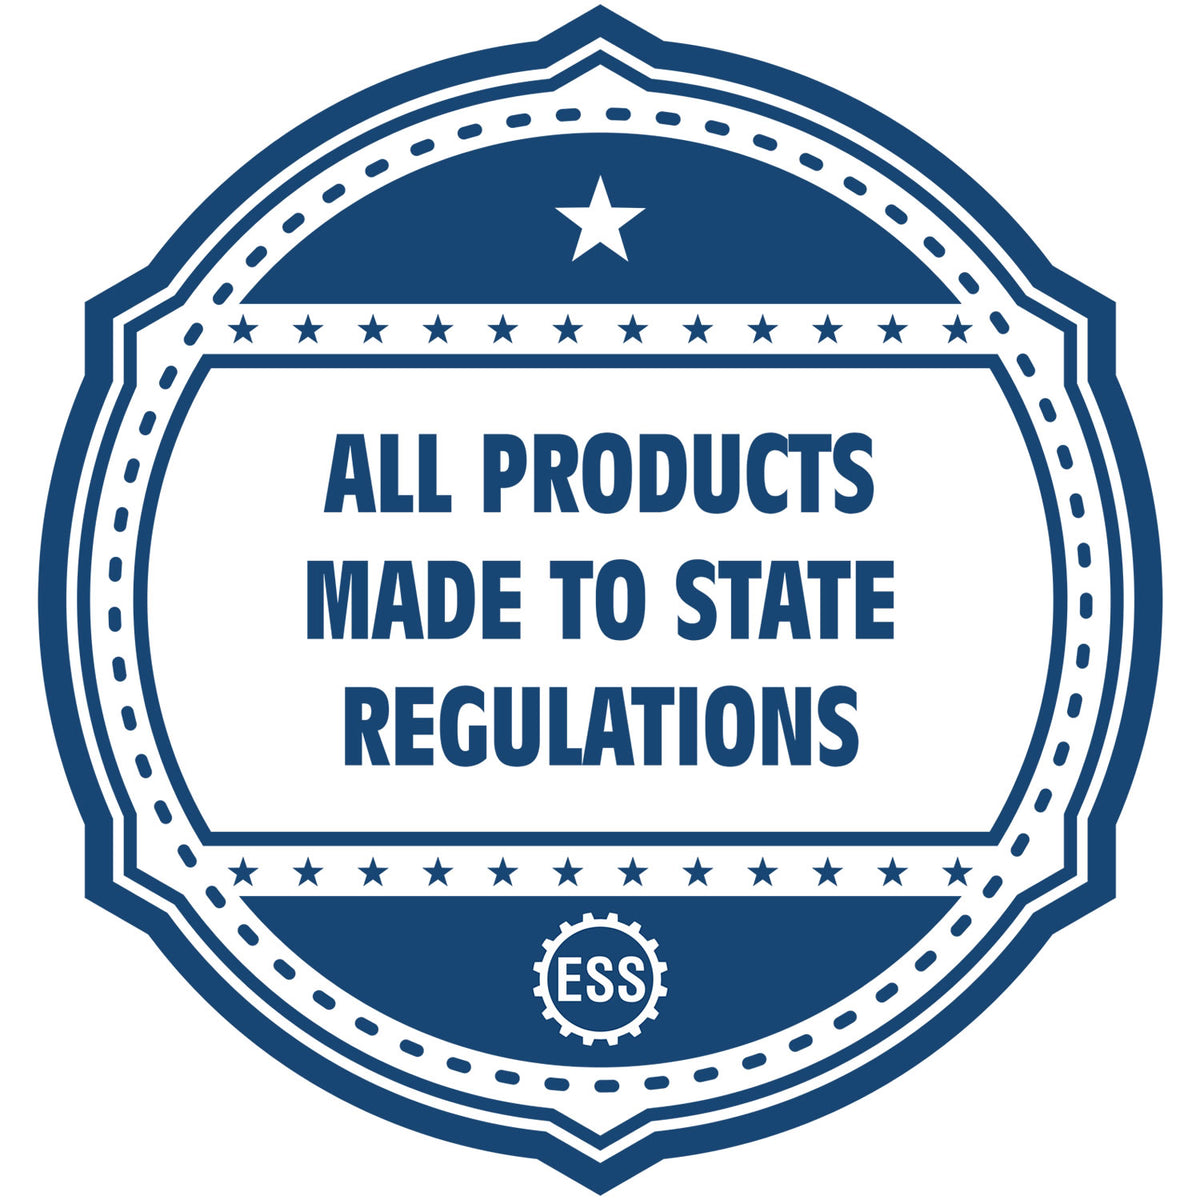 An icon or badge element for the Self-Inking State Seal California Notary Stamp showing that this product is made in compliance with state regulations.